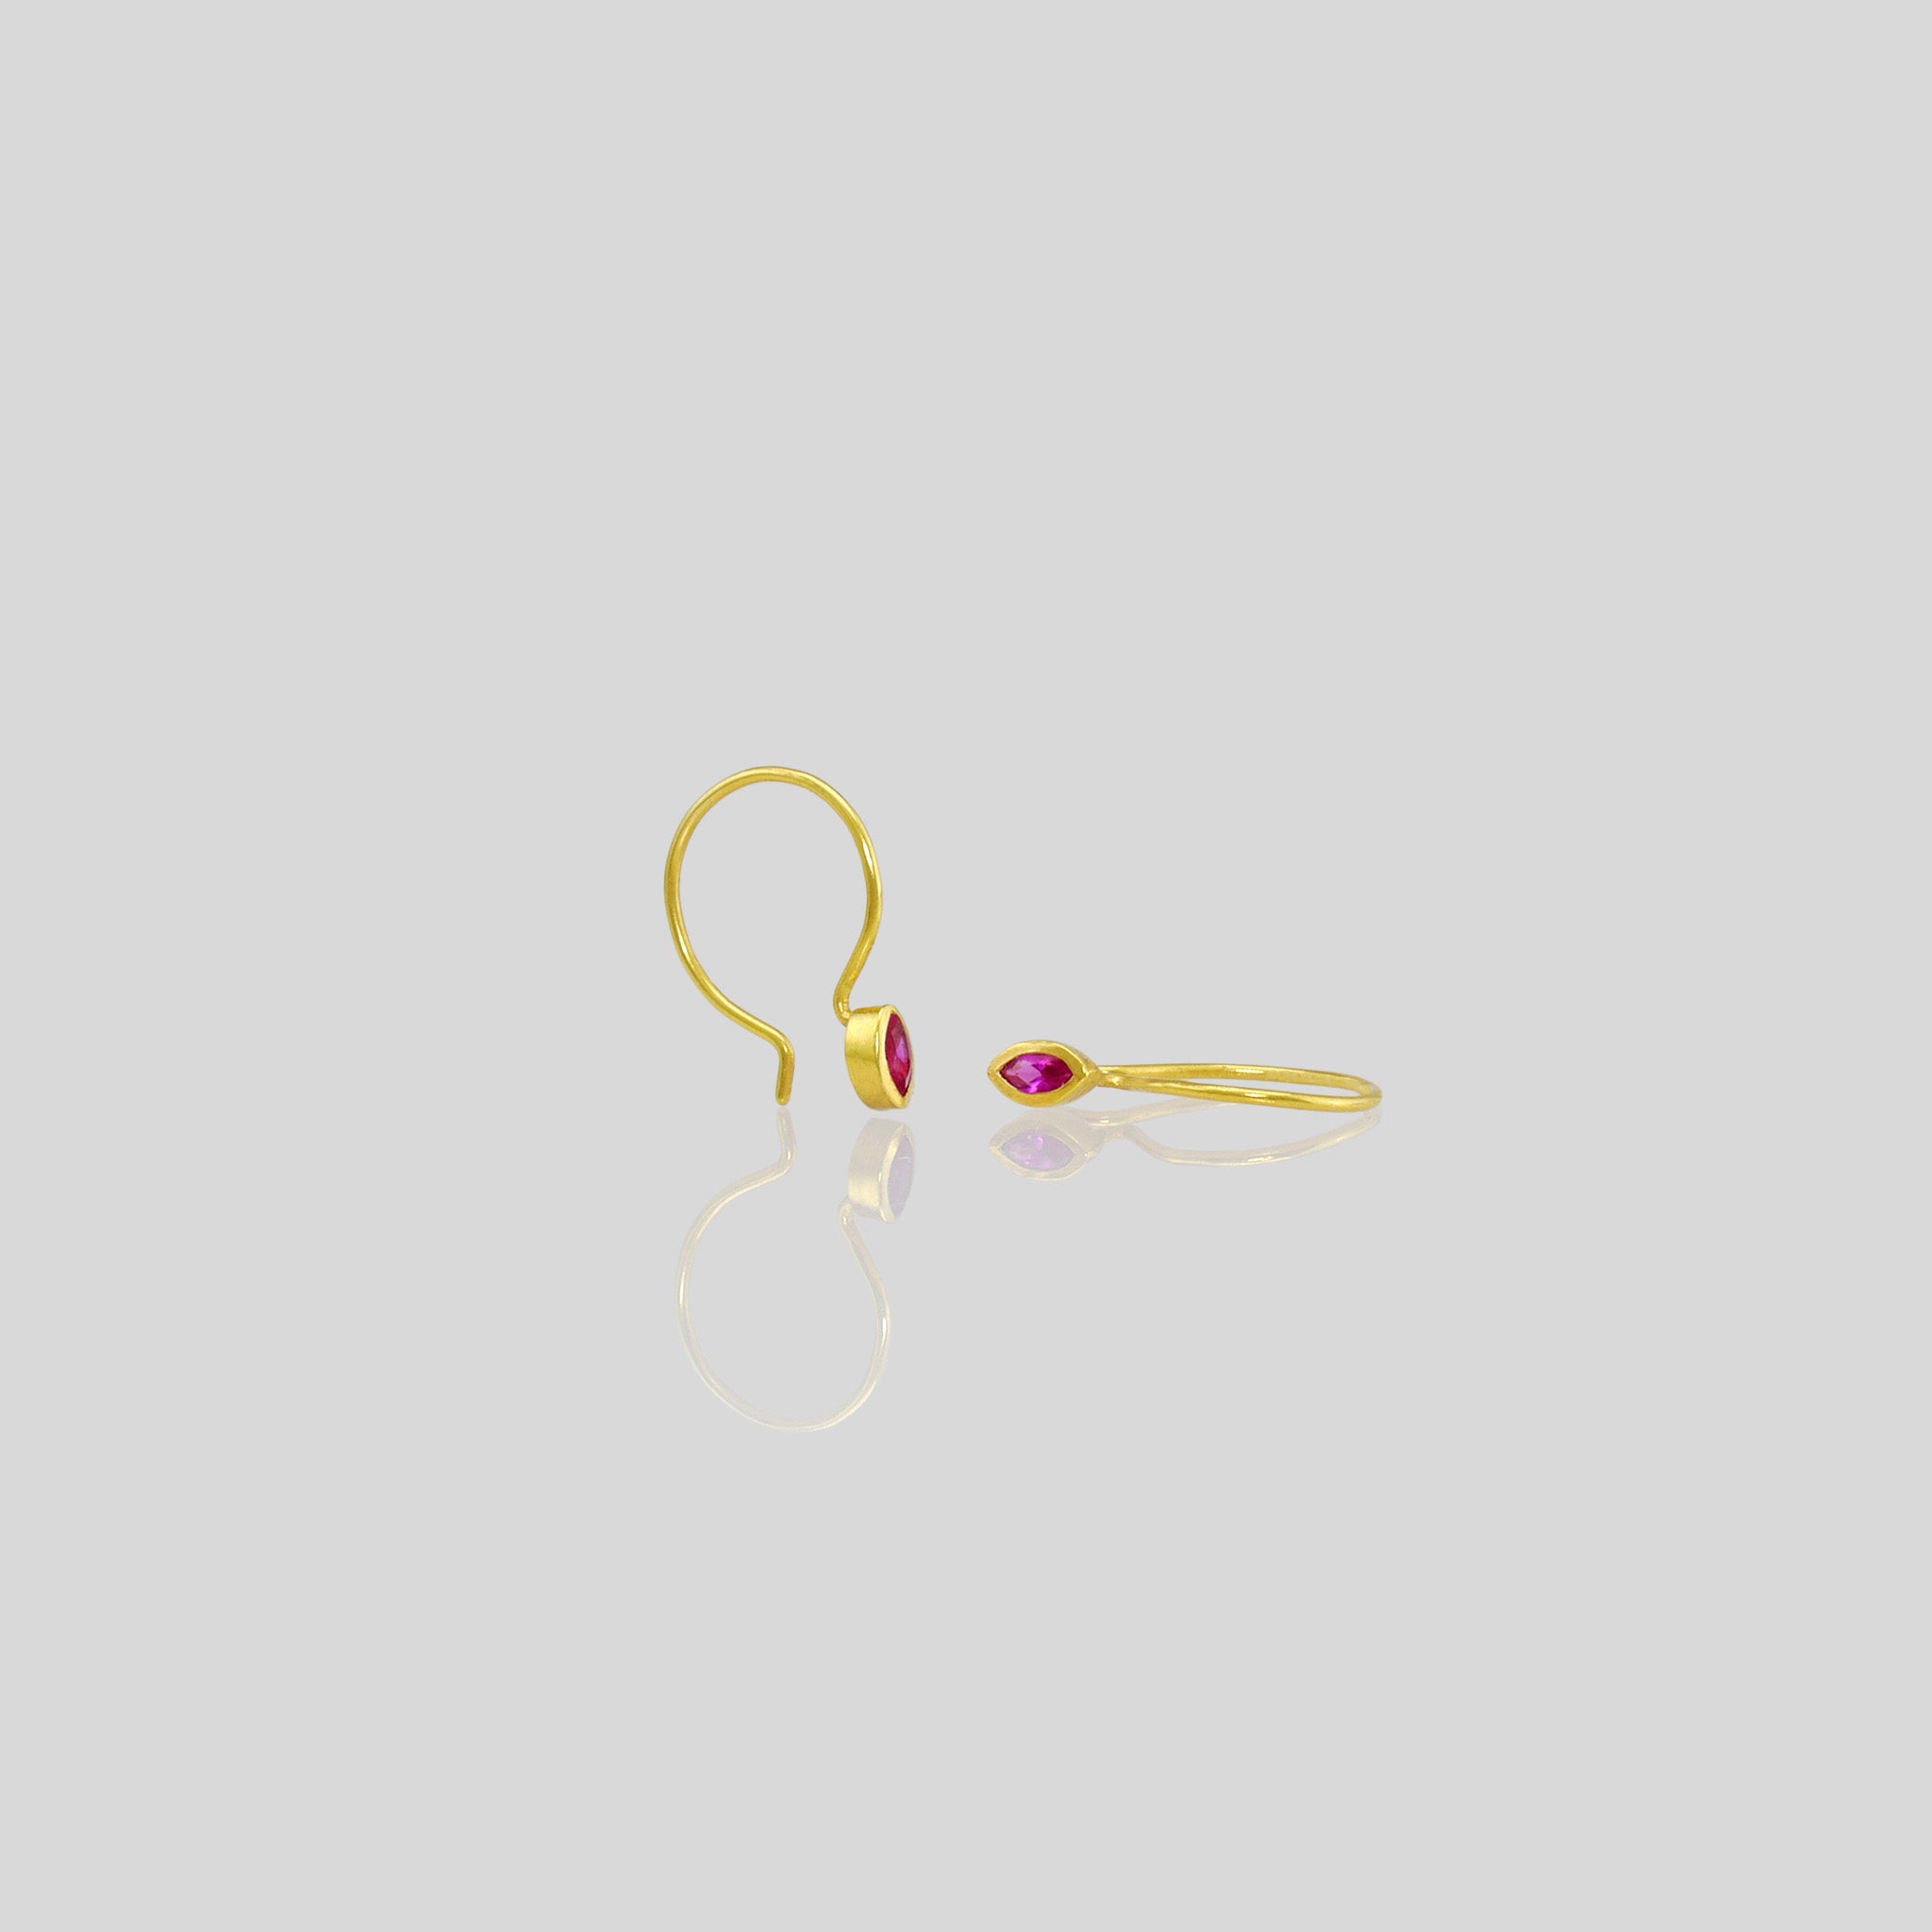 Tiny Ruby Marquee earrings on playful gold hoops. Elegant and eye-catching!